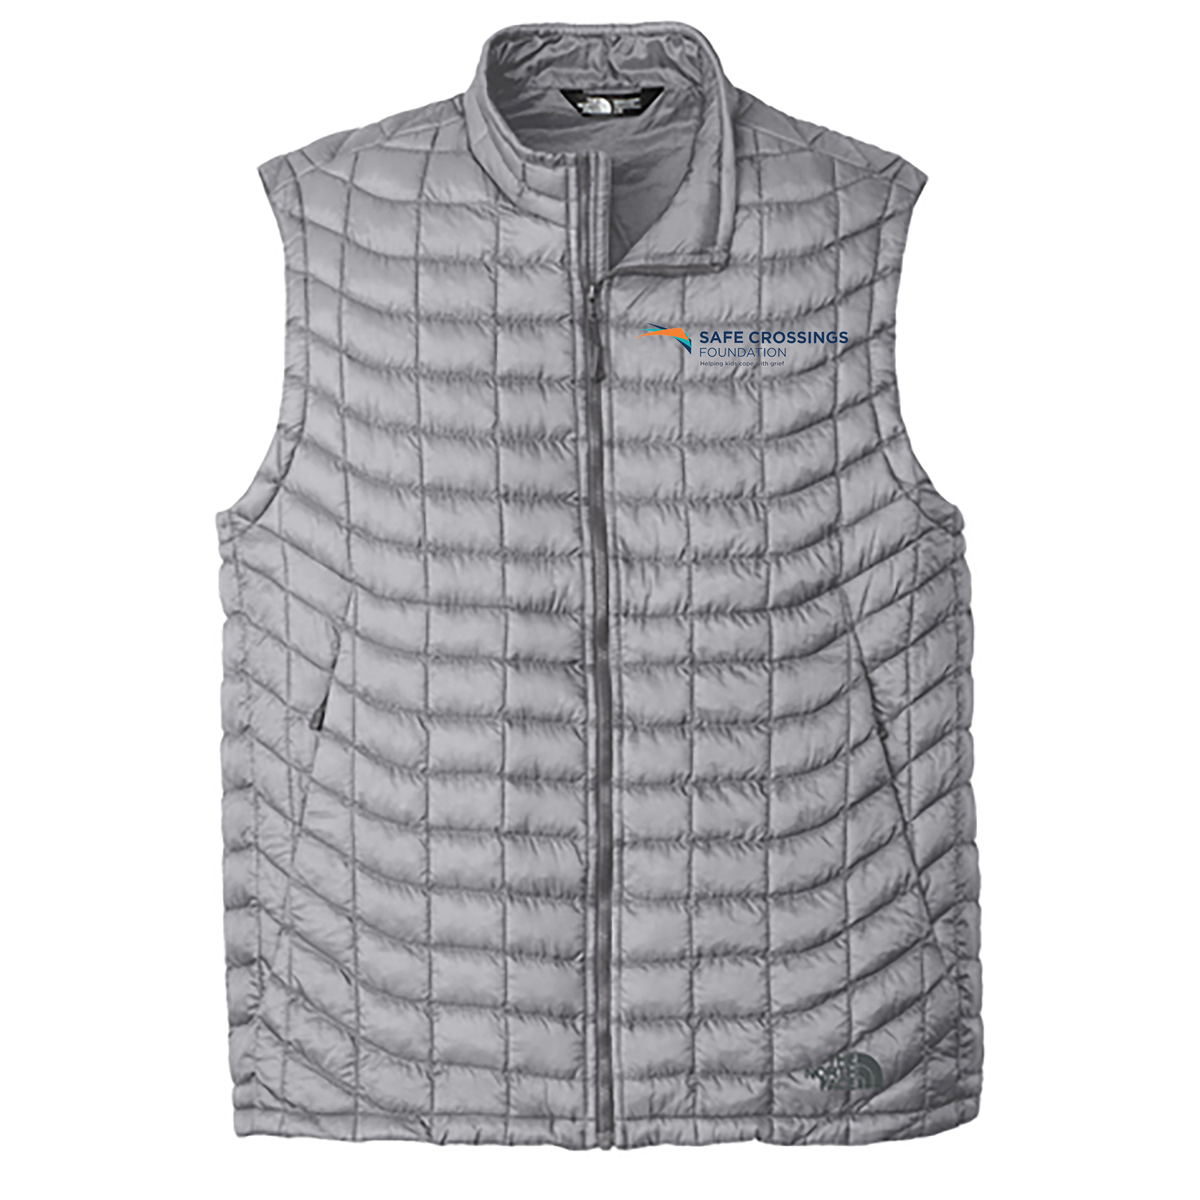 Safe Crossings Foundation The North Face Thermoball Vest